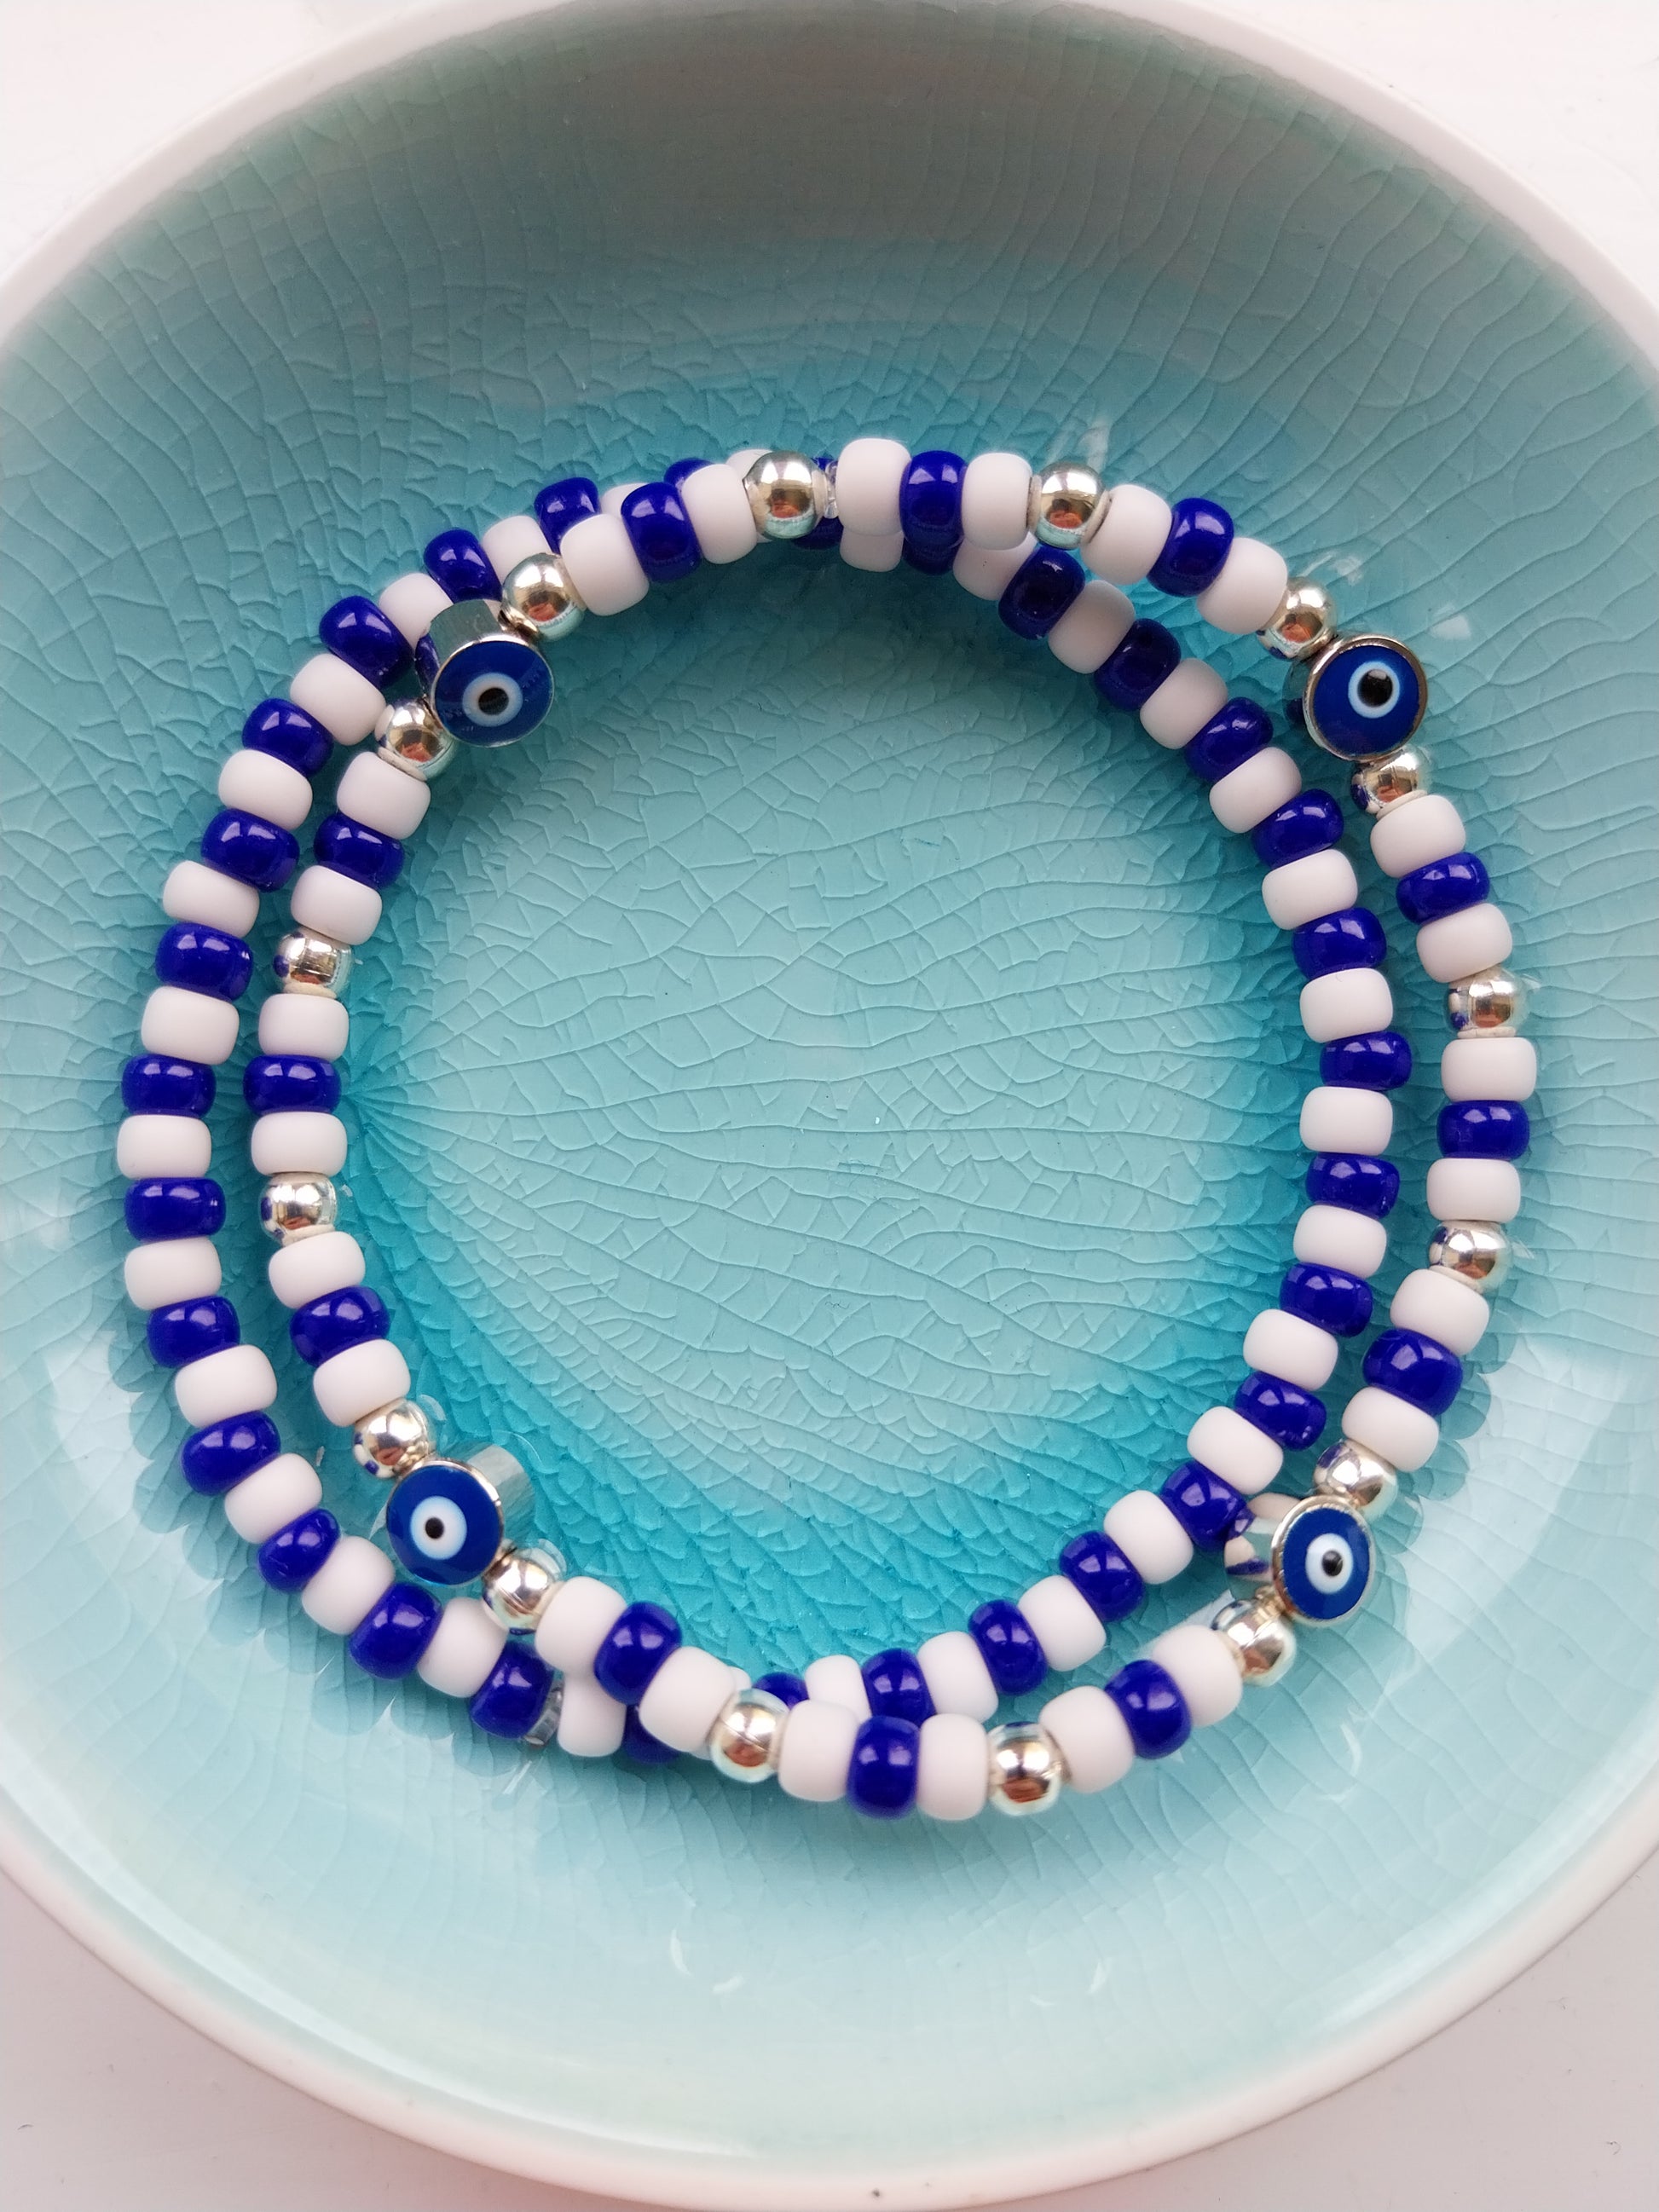 2 Blue and white bead bracelets one features evil eye charm beads